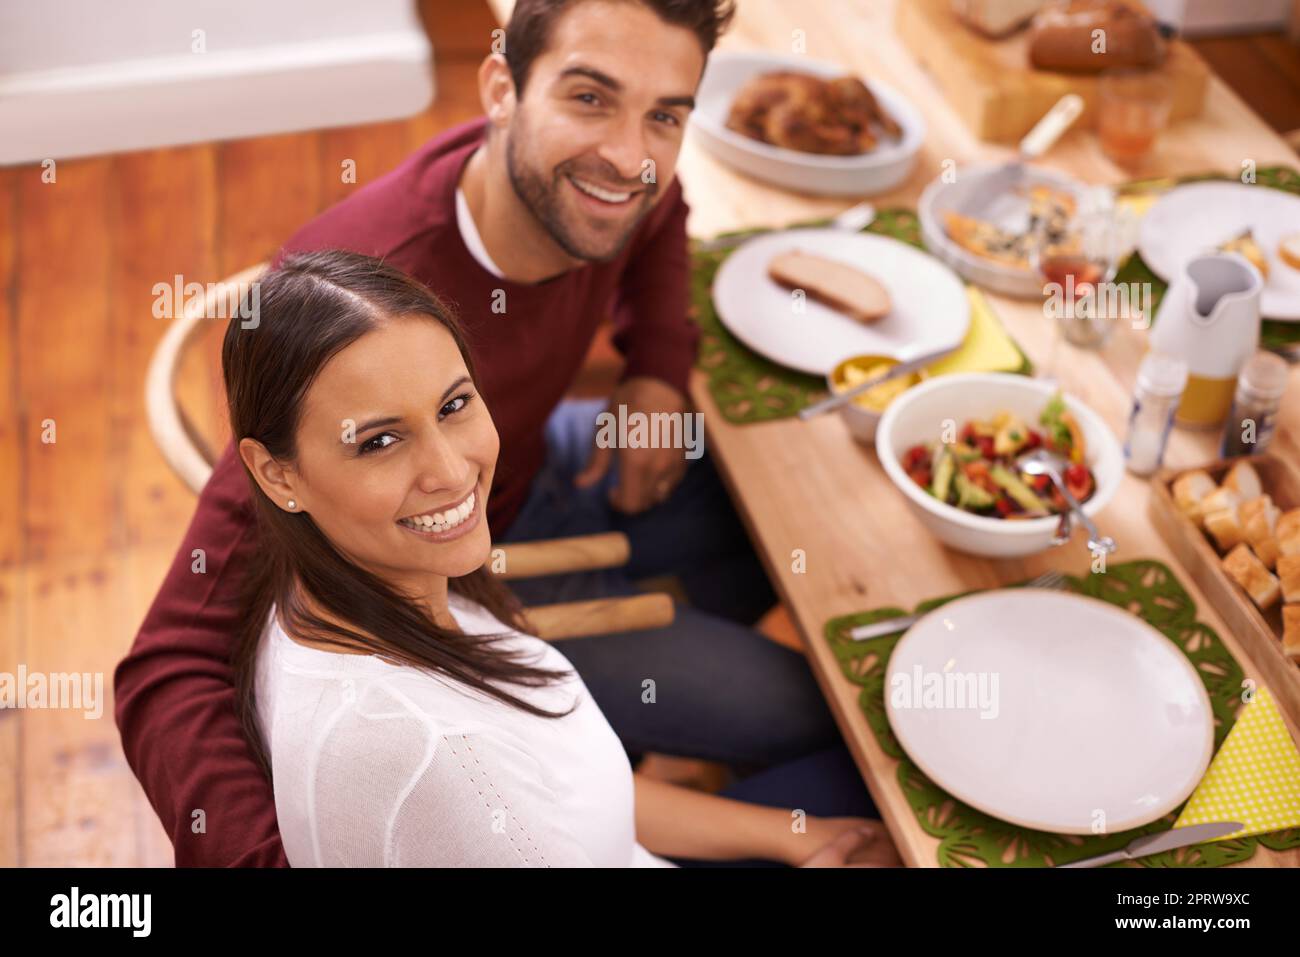 Laughter is brightest where food is best. A happy couple enjoying a family meal around the table. Stock Photo